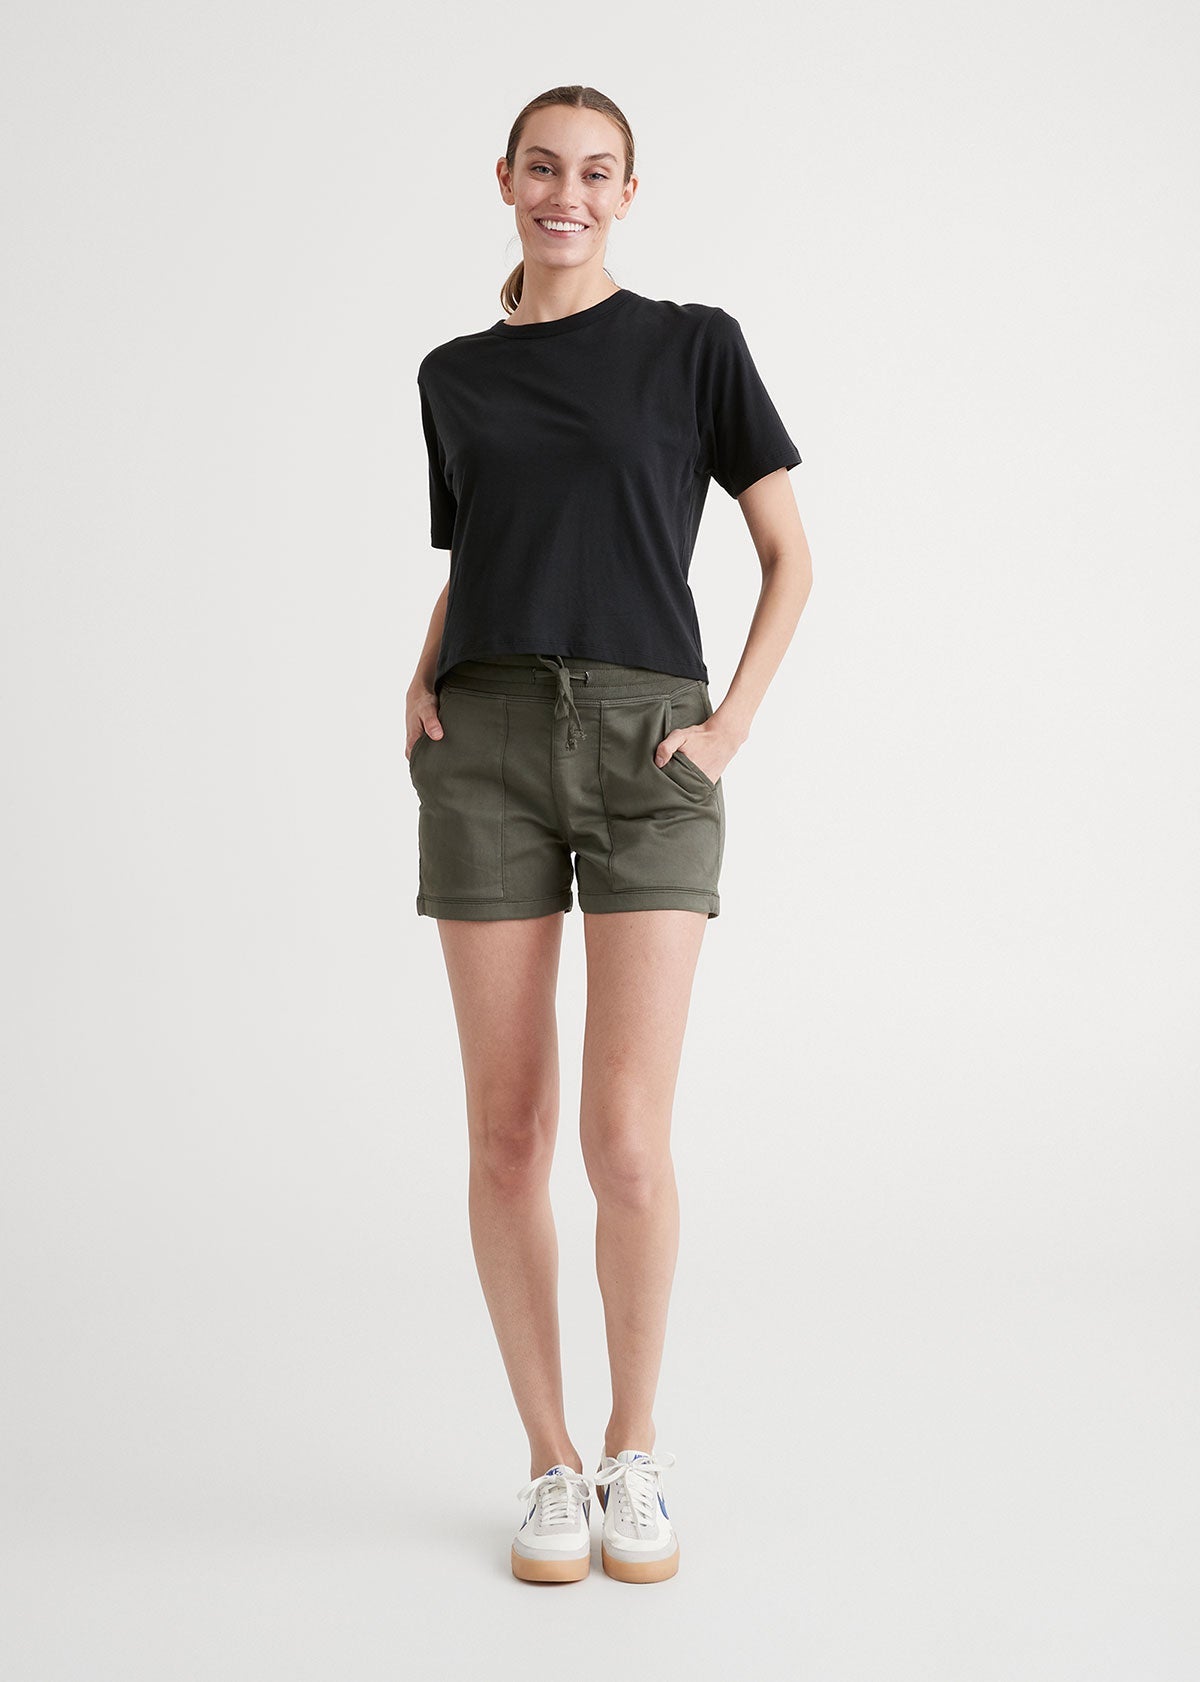 Women's Stretch Shorts - Performance by DUER